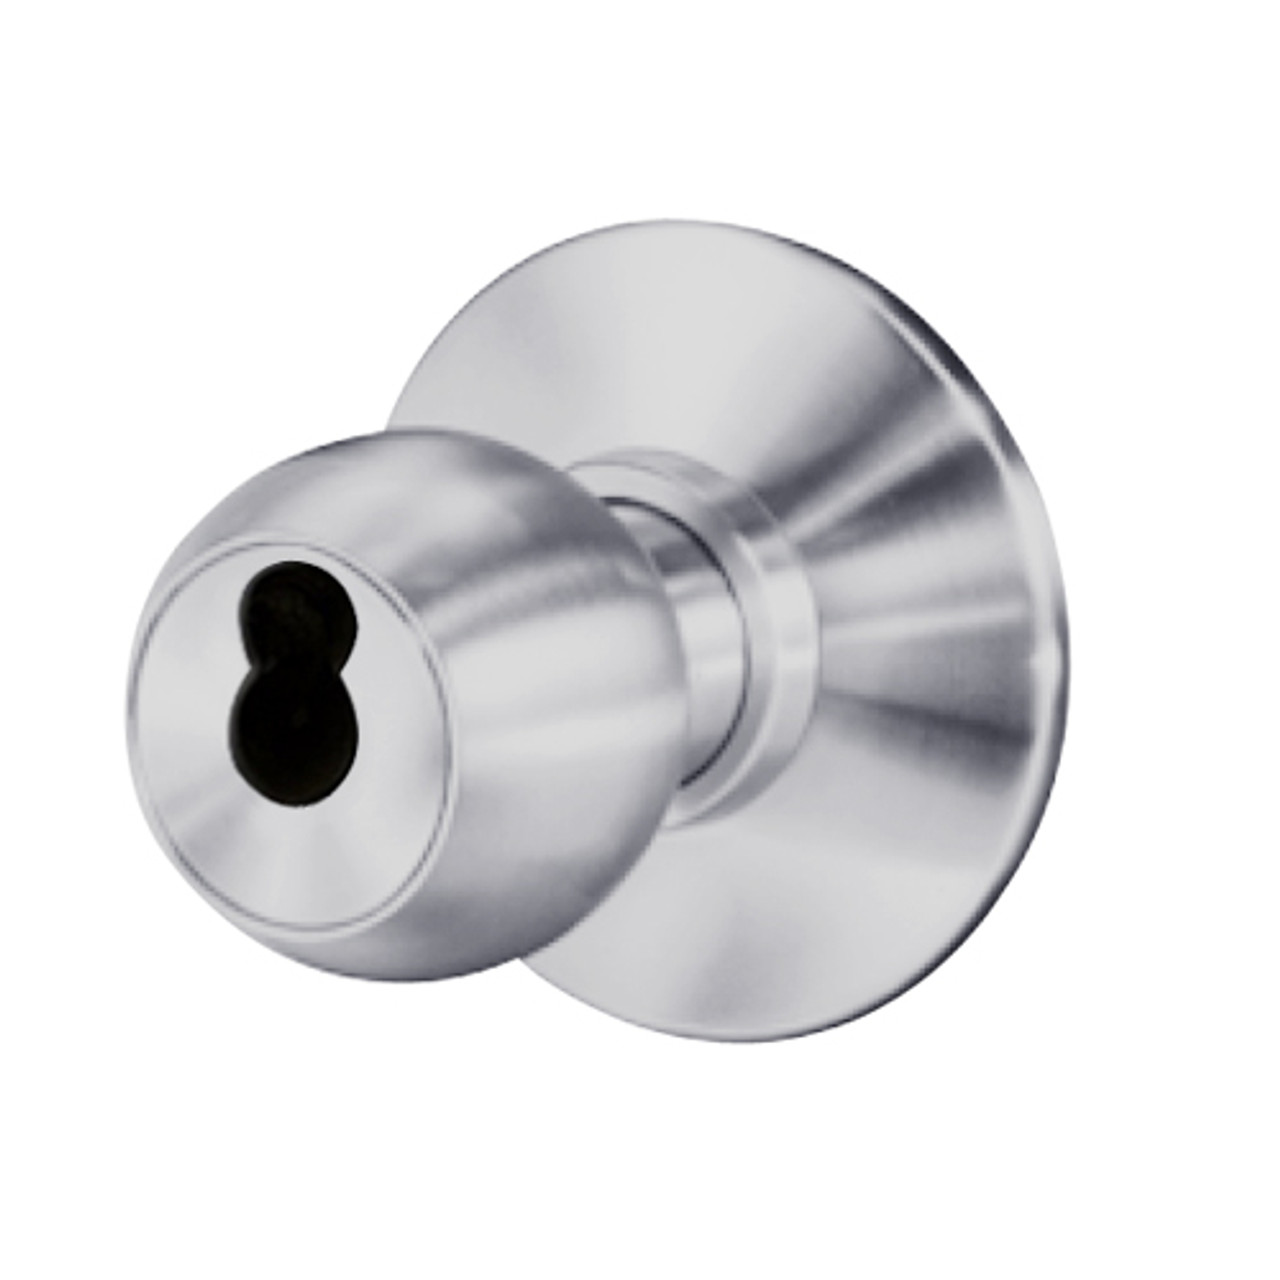 8K37XR4DS3626 Best 8K Series Special Heavy Duty Cylindrical Knob Locks with Round Style in Satin Chrome